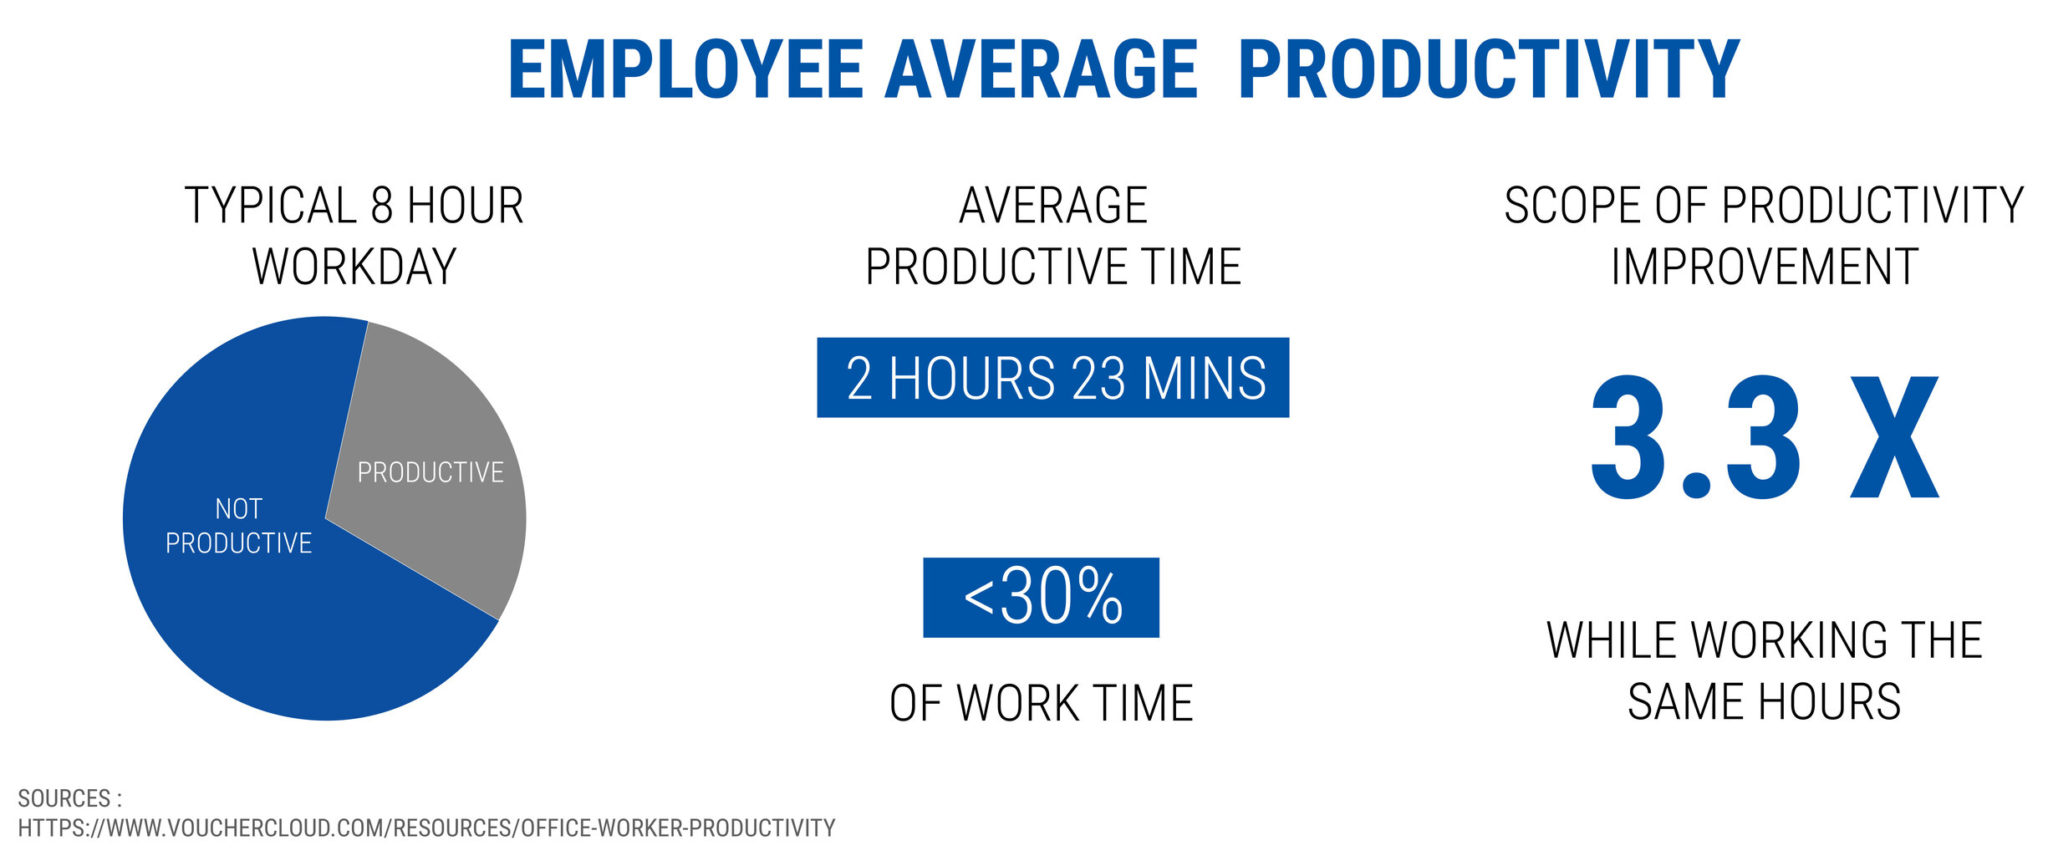 employee average productivity - starting a coaching business while working full-time